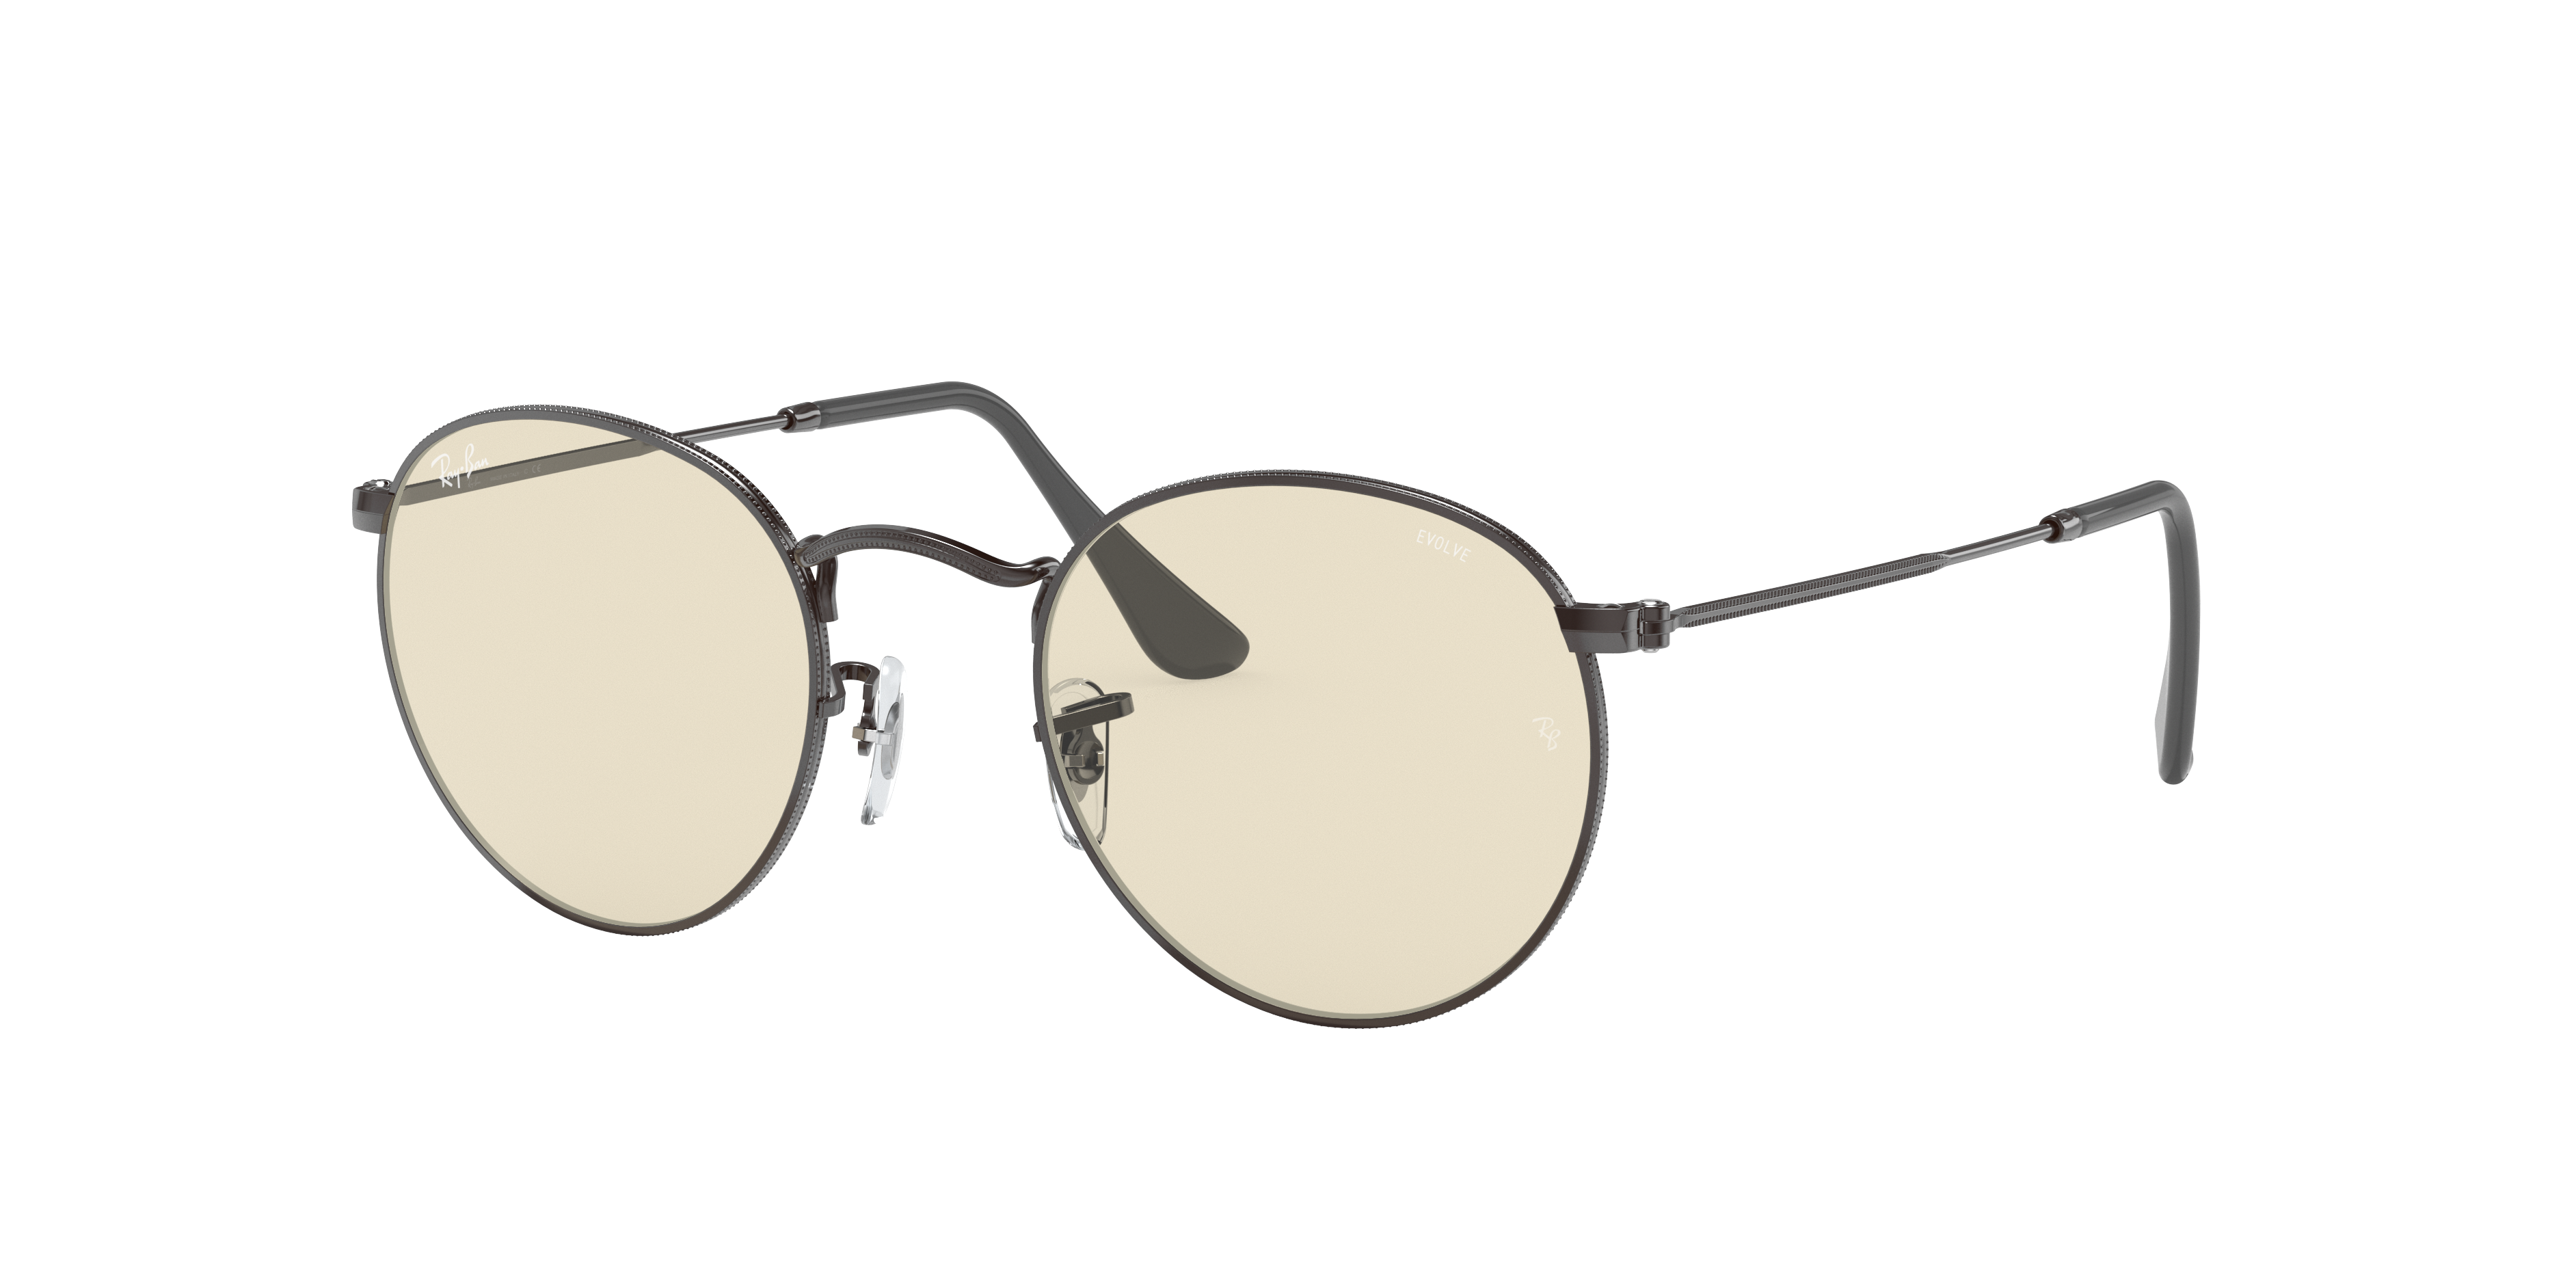 ray ban round flat lenses review